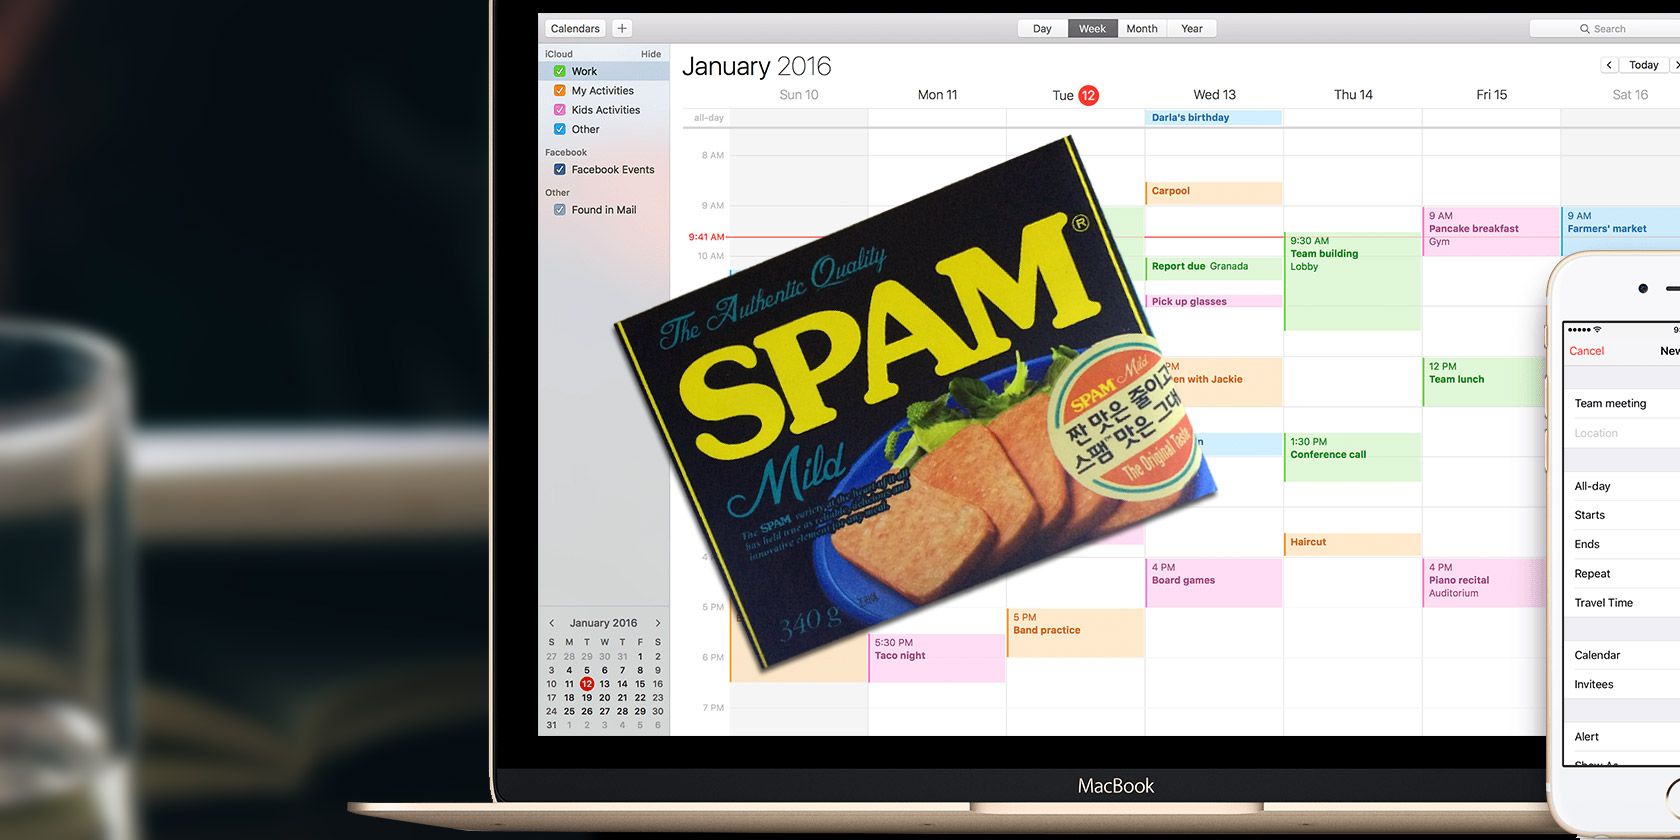 How to Stop Remove iCloud Calendar Spam the Right Way